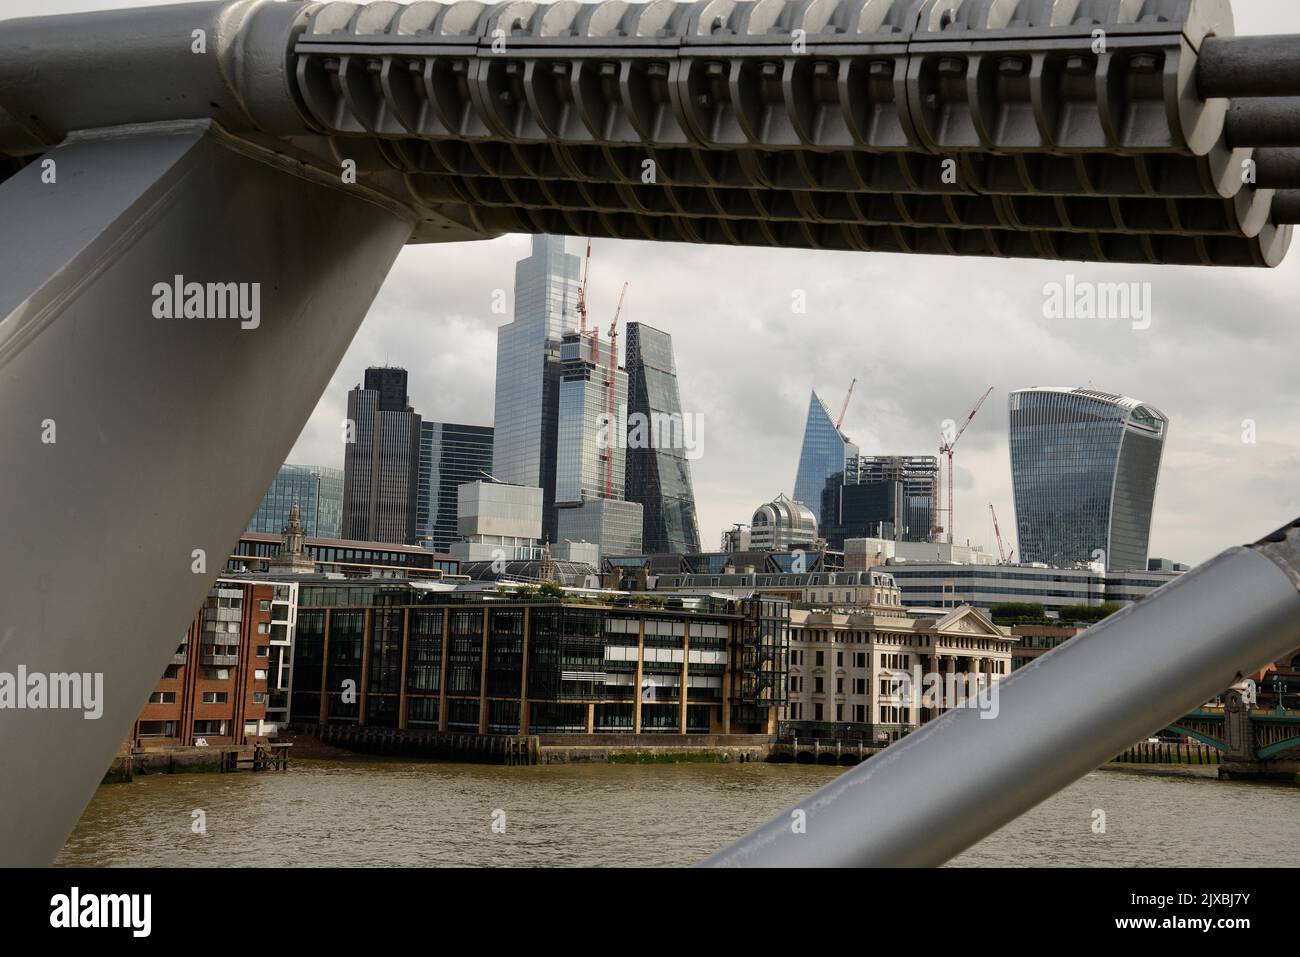 The City of London from the Millennium Bridge. The struts of the bridge framing the view of the City. Stock Photo